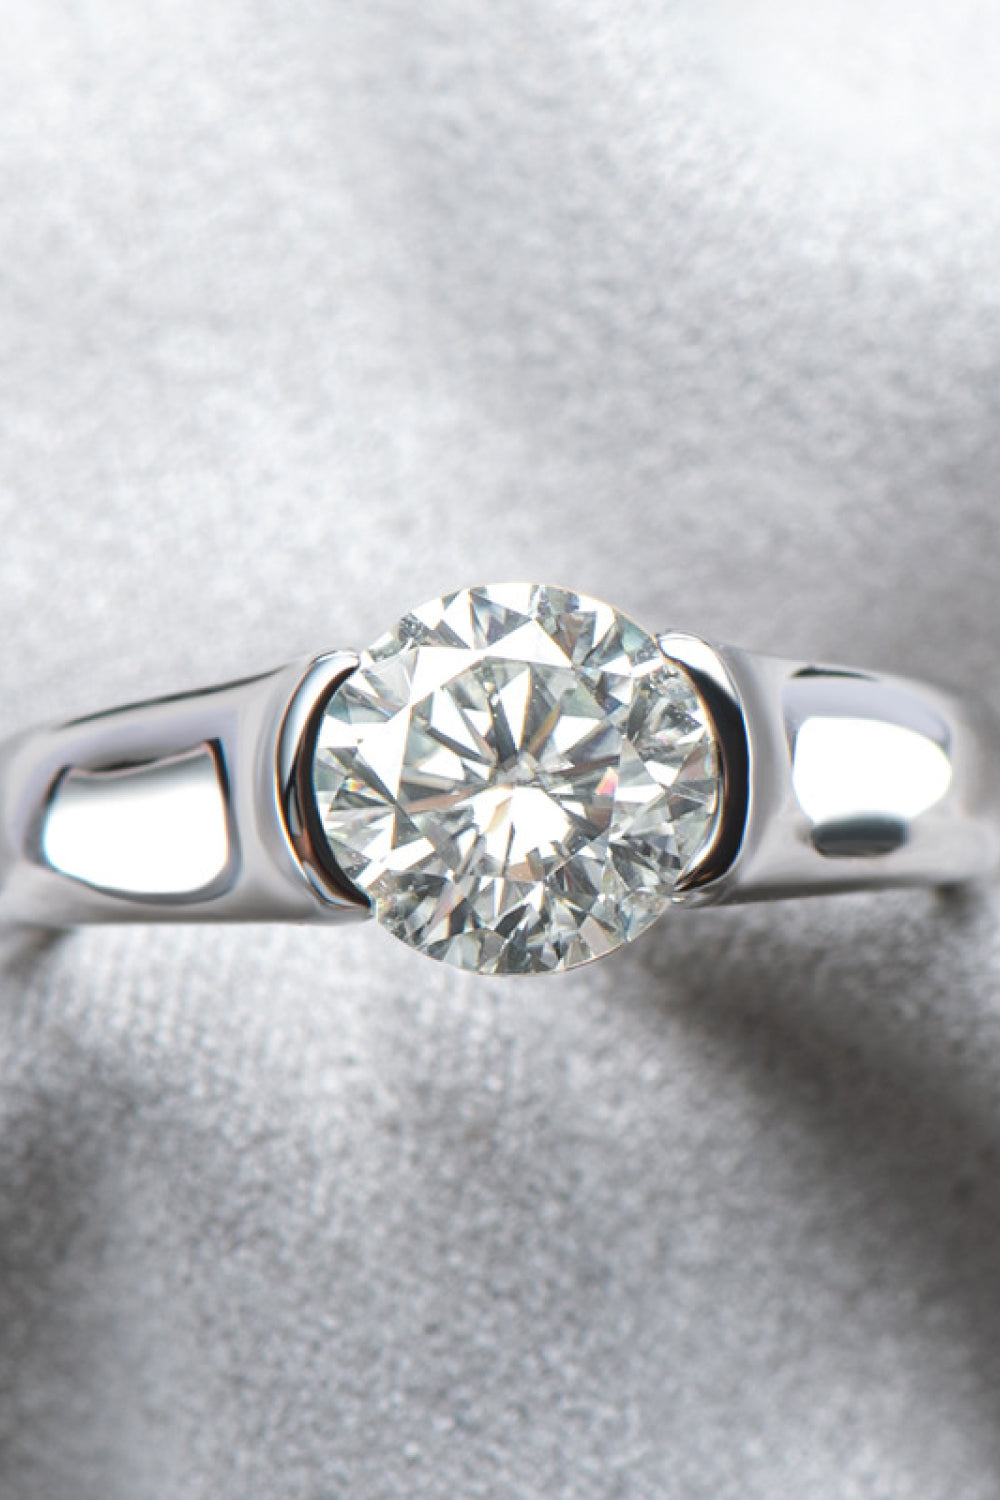 Looking Good 2 Carat Brilliant Round Cut Moissanite Platinum Over Pure Sterling Silver Ring